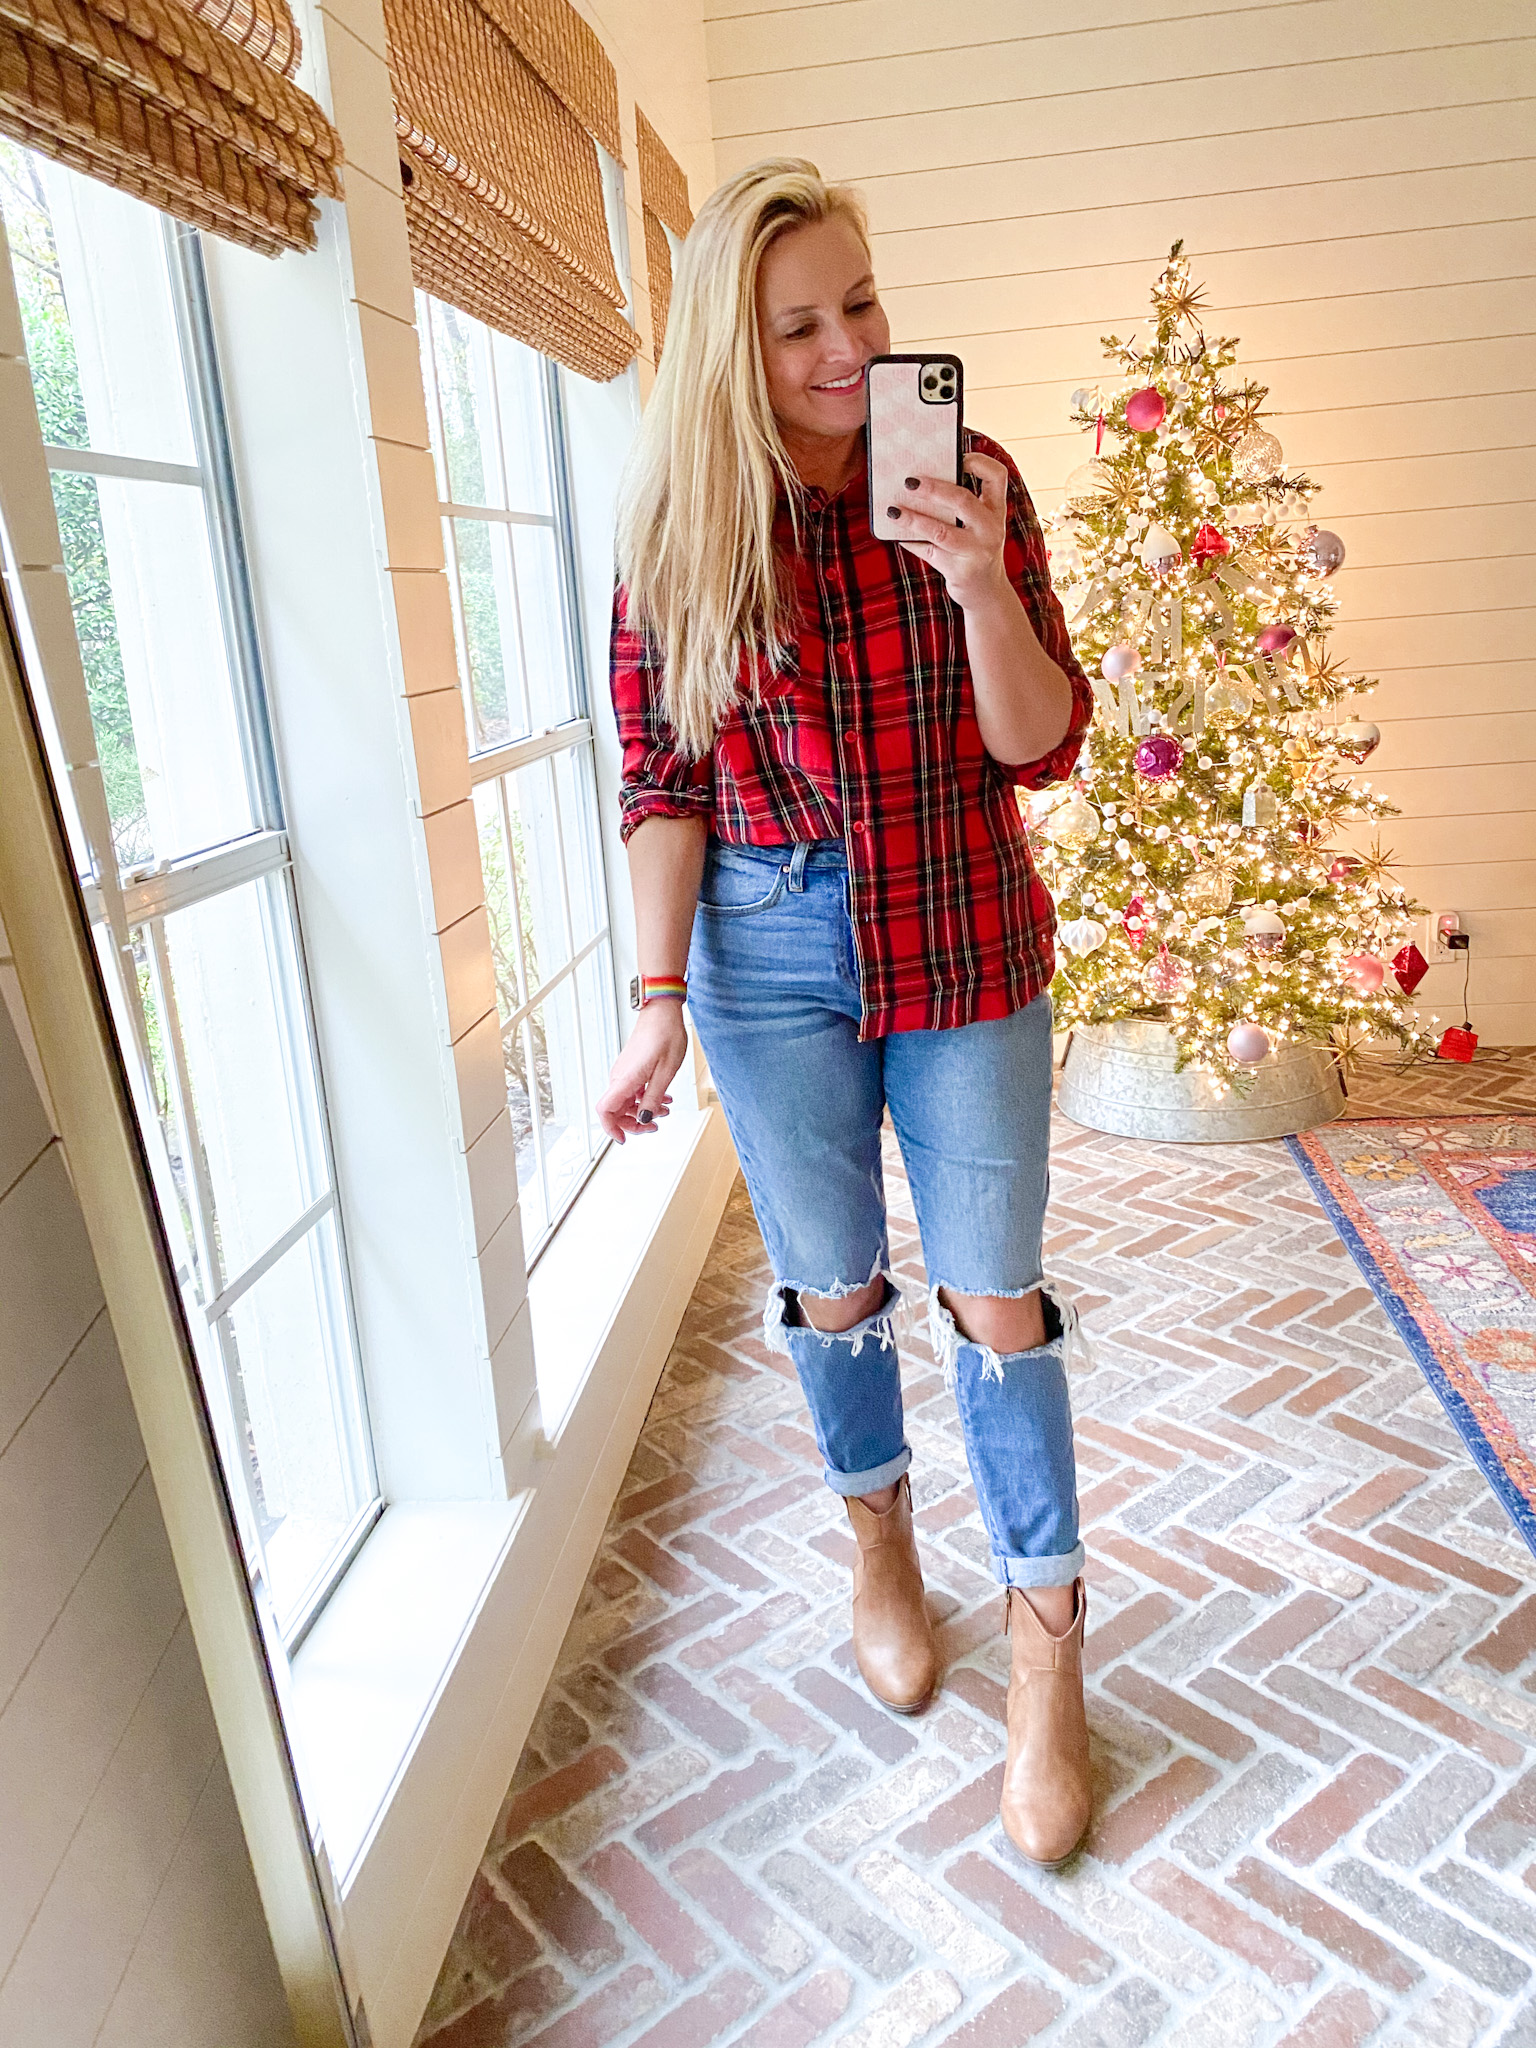 December Outfits by popular Houston fashion blog, Fancy Ashley: image of a woman standing in front of a Christmas tree decorated with pink, white and silver ornaments and wearing a red and green plaid button up top, distressed denim, and tan ankle boots. 